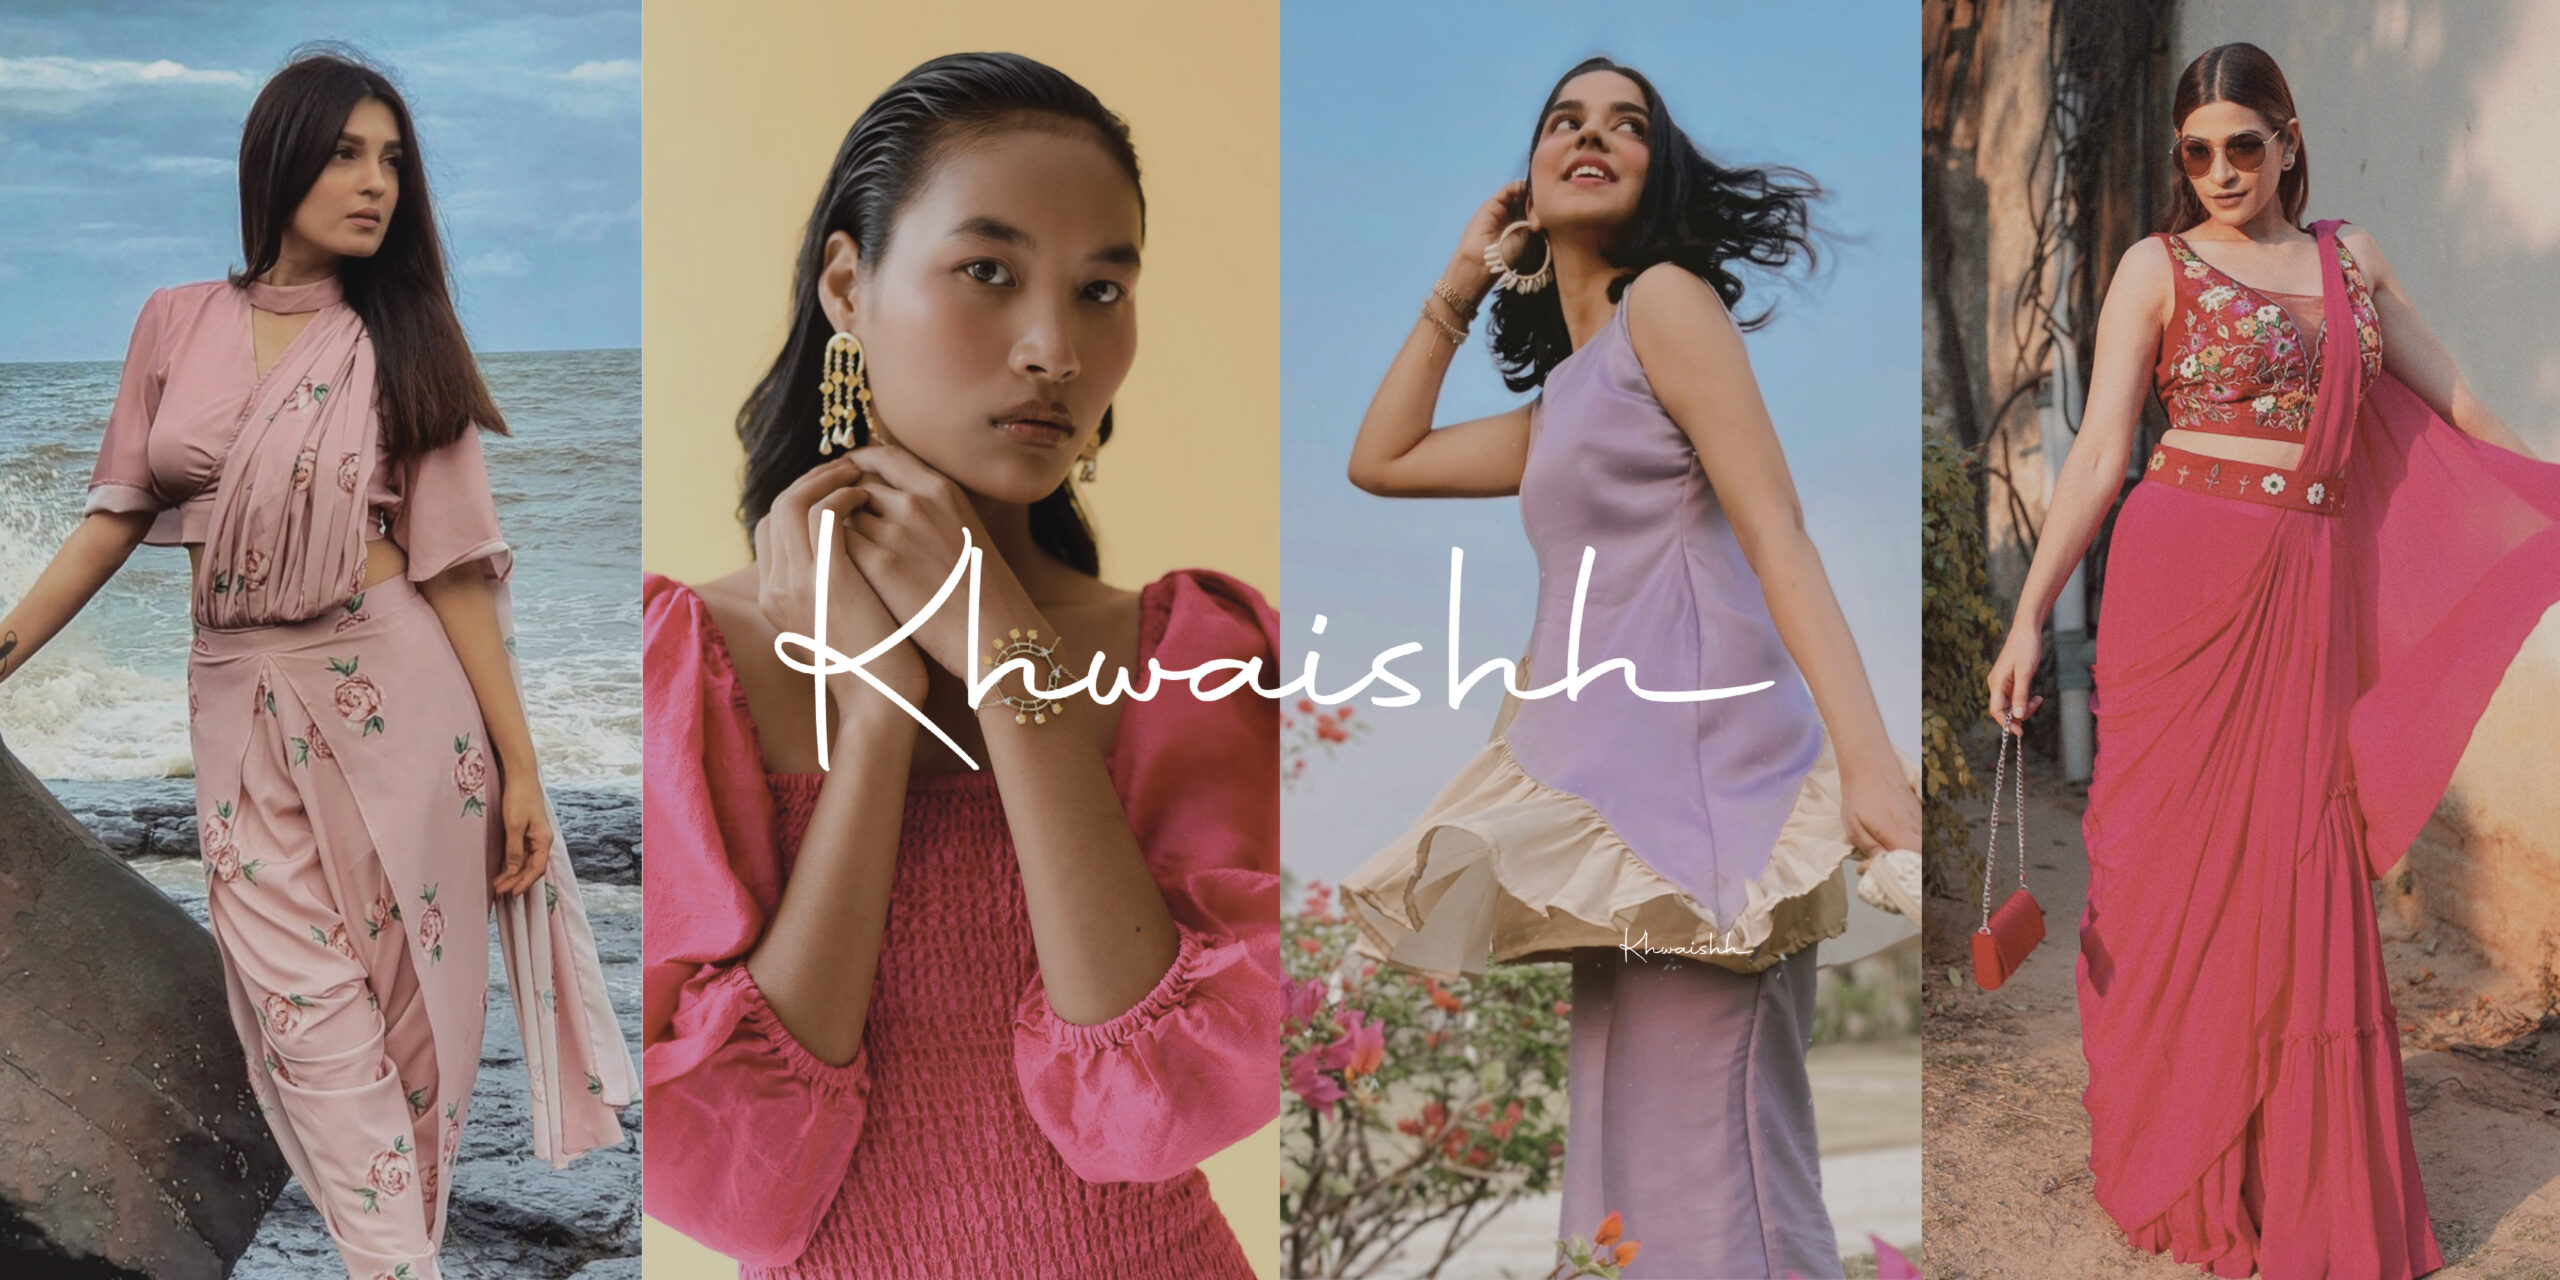 Khwaishh- Effectuating A Woman’s Desire For Fashion